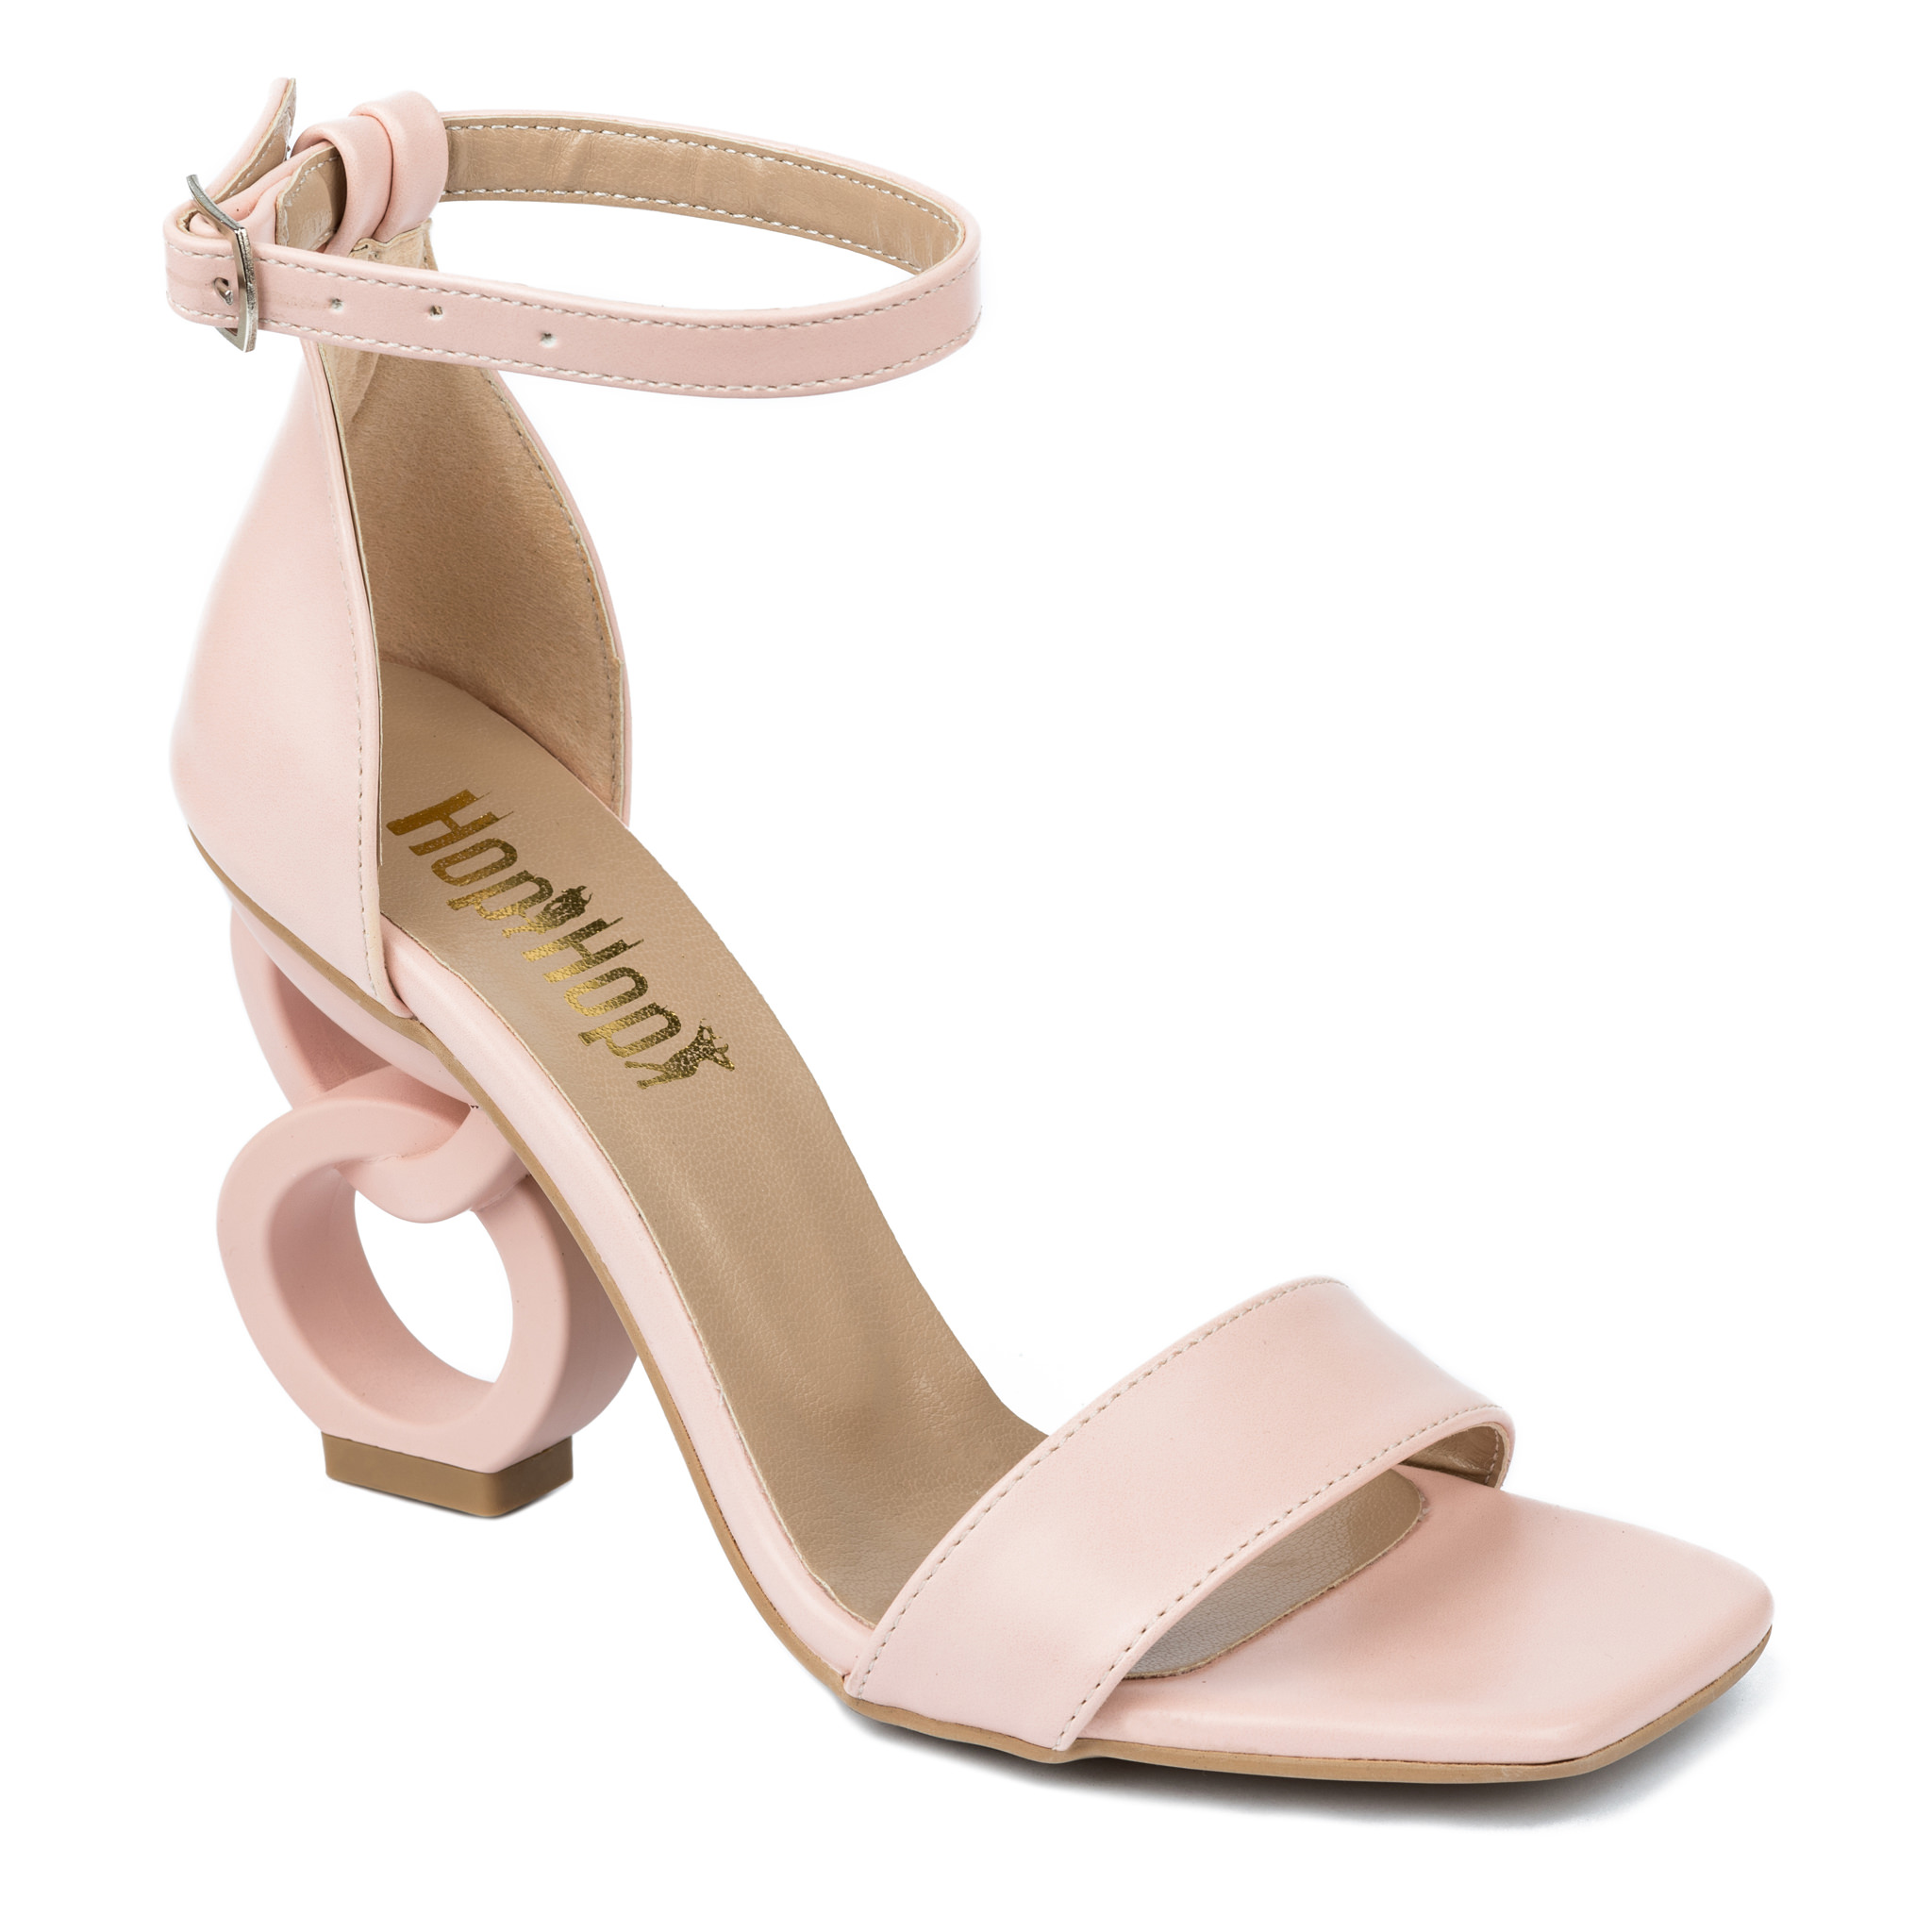 SANDALS WITH THICK HEEL - ROSE